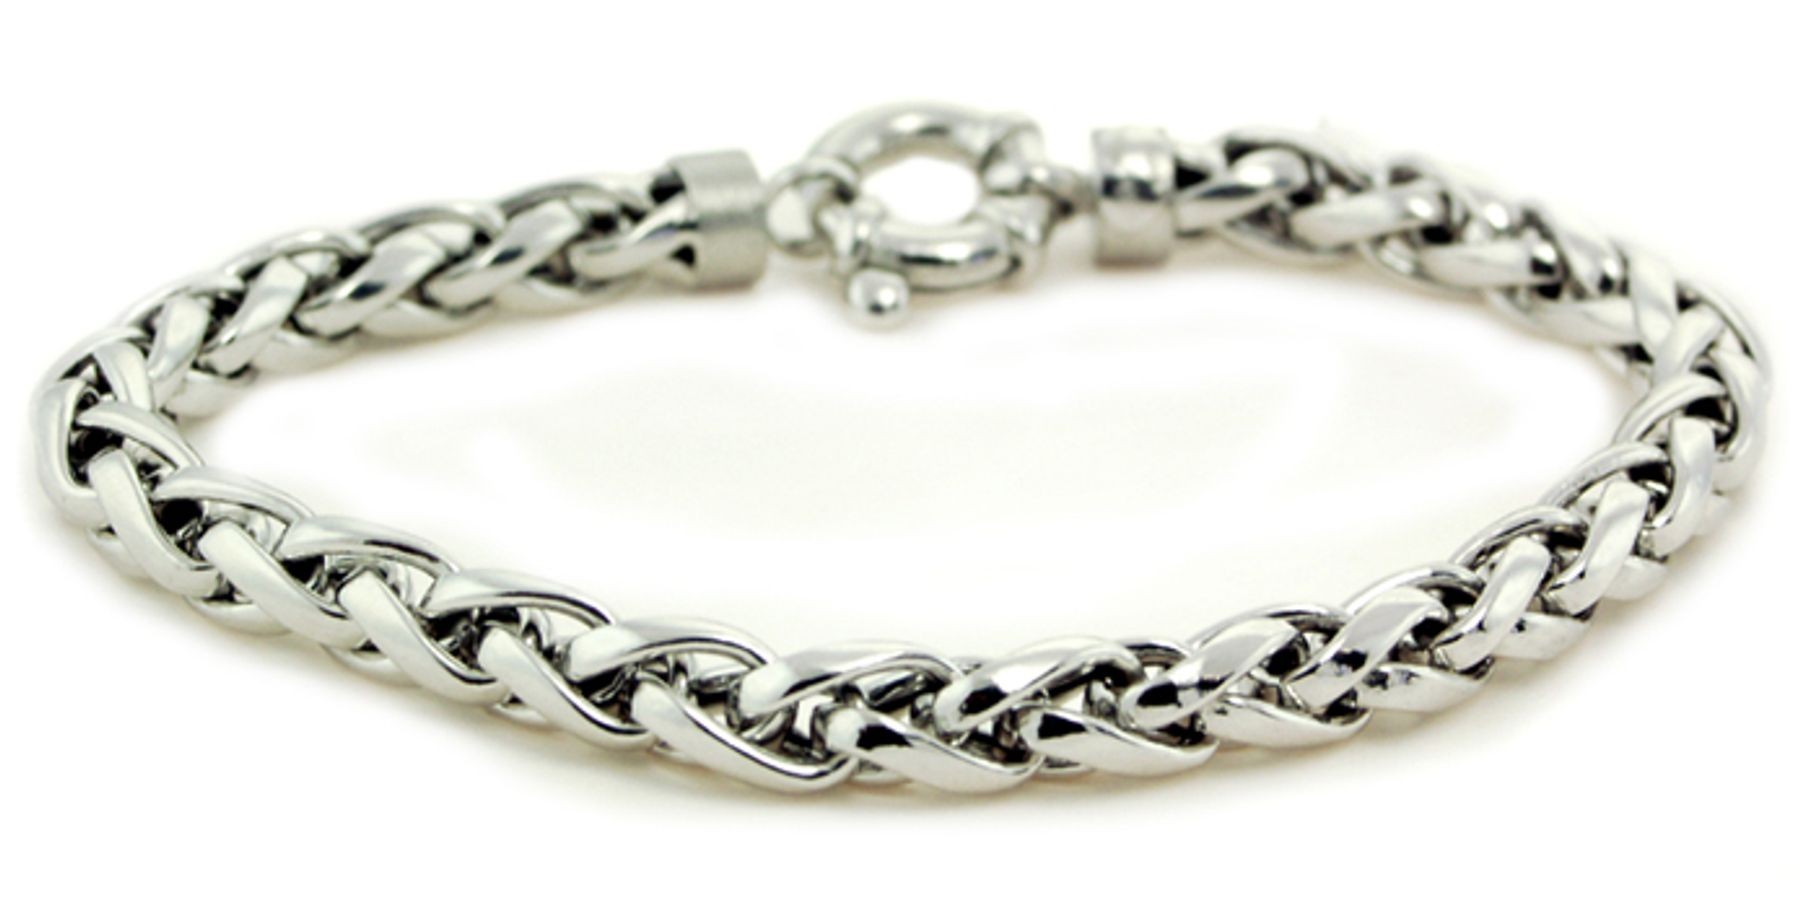 Platinum Wheat Chain and Bracelet. View Chains and Bracelets.